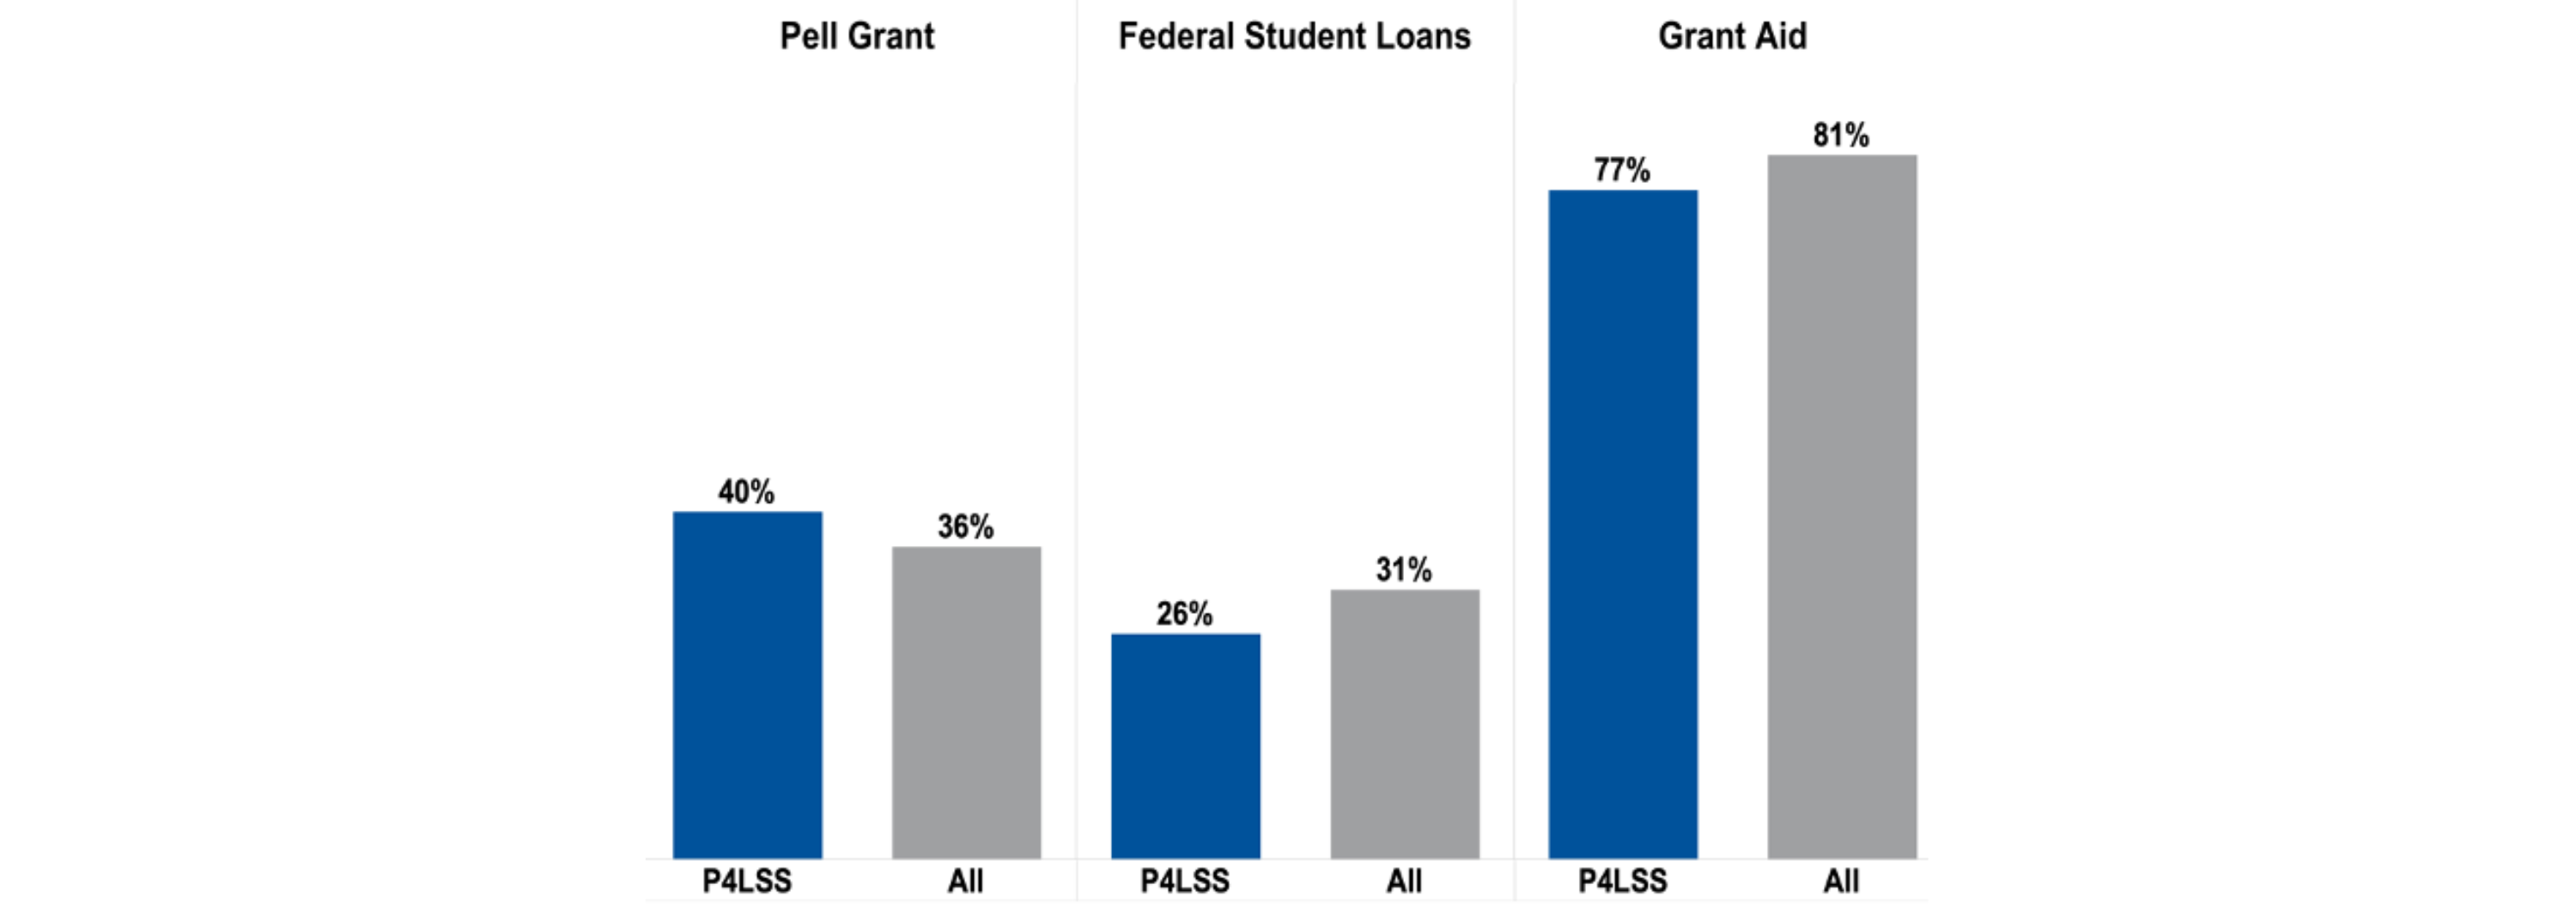 Bar graph representing About 40% of students received Pell Grants compared to 36% of students nationally, 26% received federal loans compared to 31% nationally, and 77% received total grant aid compared to 81% nationally